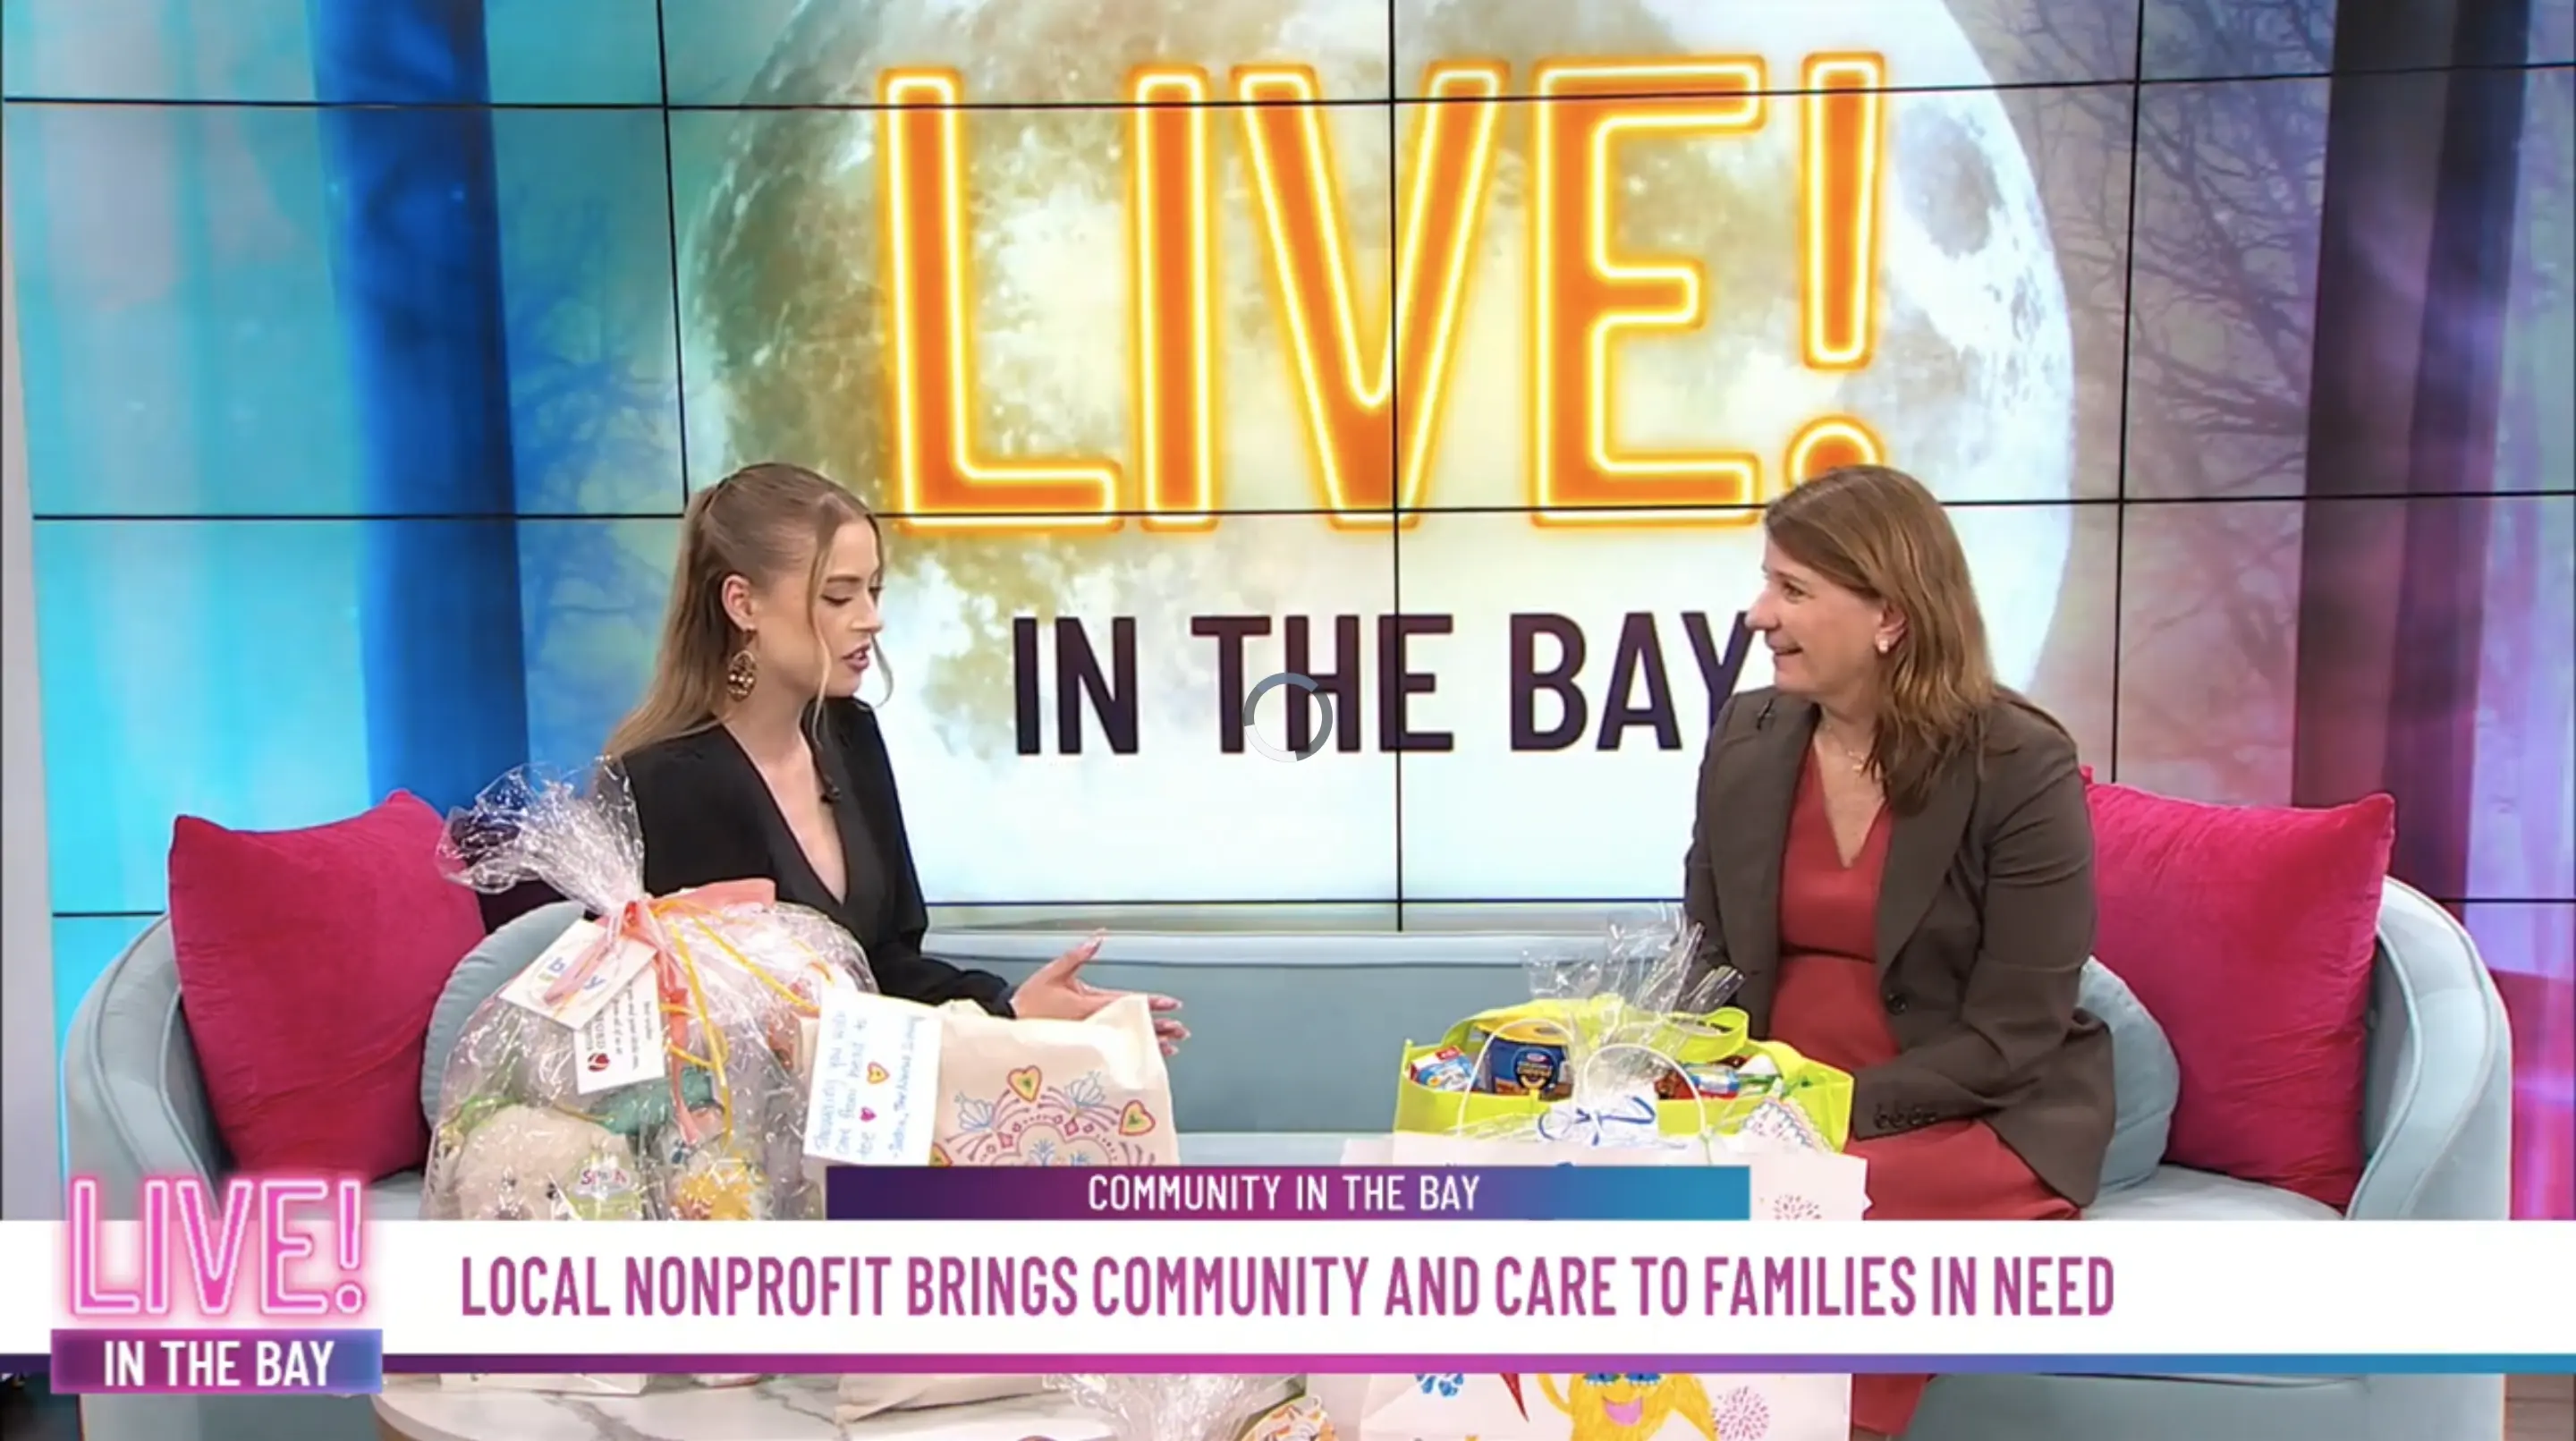 Executive Director Kathy Hansen Sweeny of There With Care joined host Olivia Horton to talk about how they are helping to bring community and care to families facing medical crises.